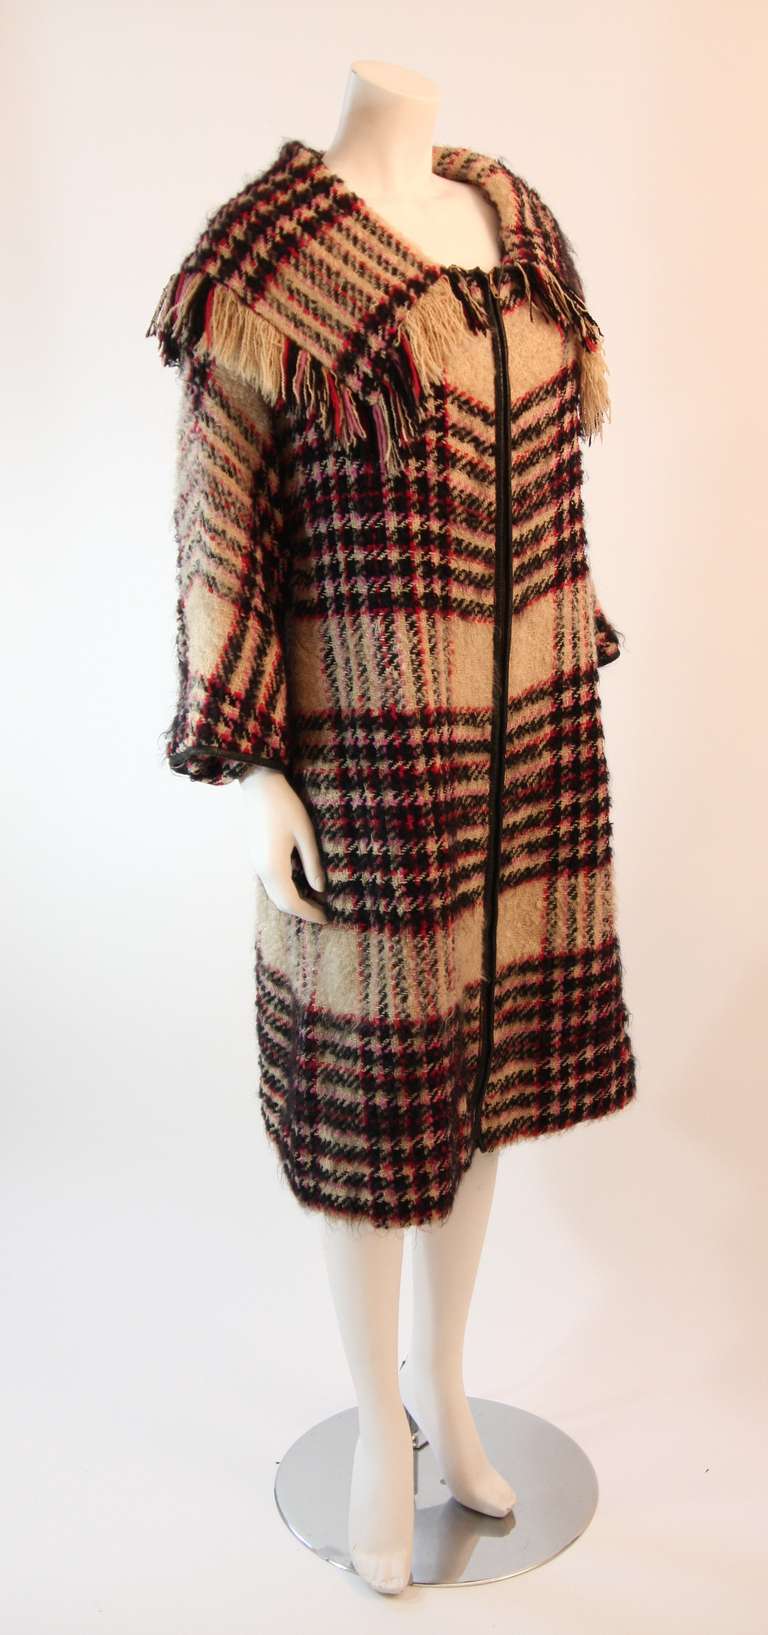 This is an amazing Bonnie Cashin wool coat. The coat is a wonderful multi-colored plaid with red, pink, and black striping with an oatmeal base. The coat also features a zipper closure with leather trim, two front pockets, and 3/4 bracelet length